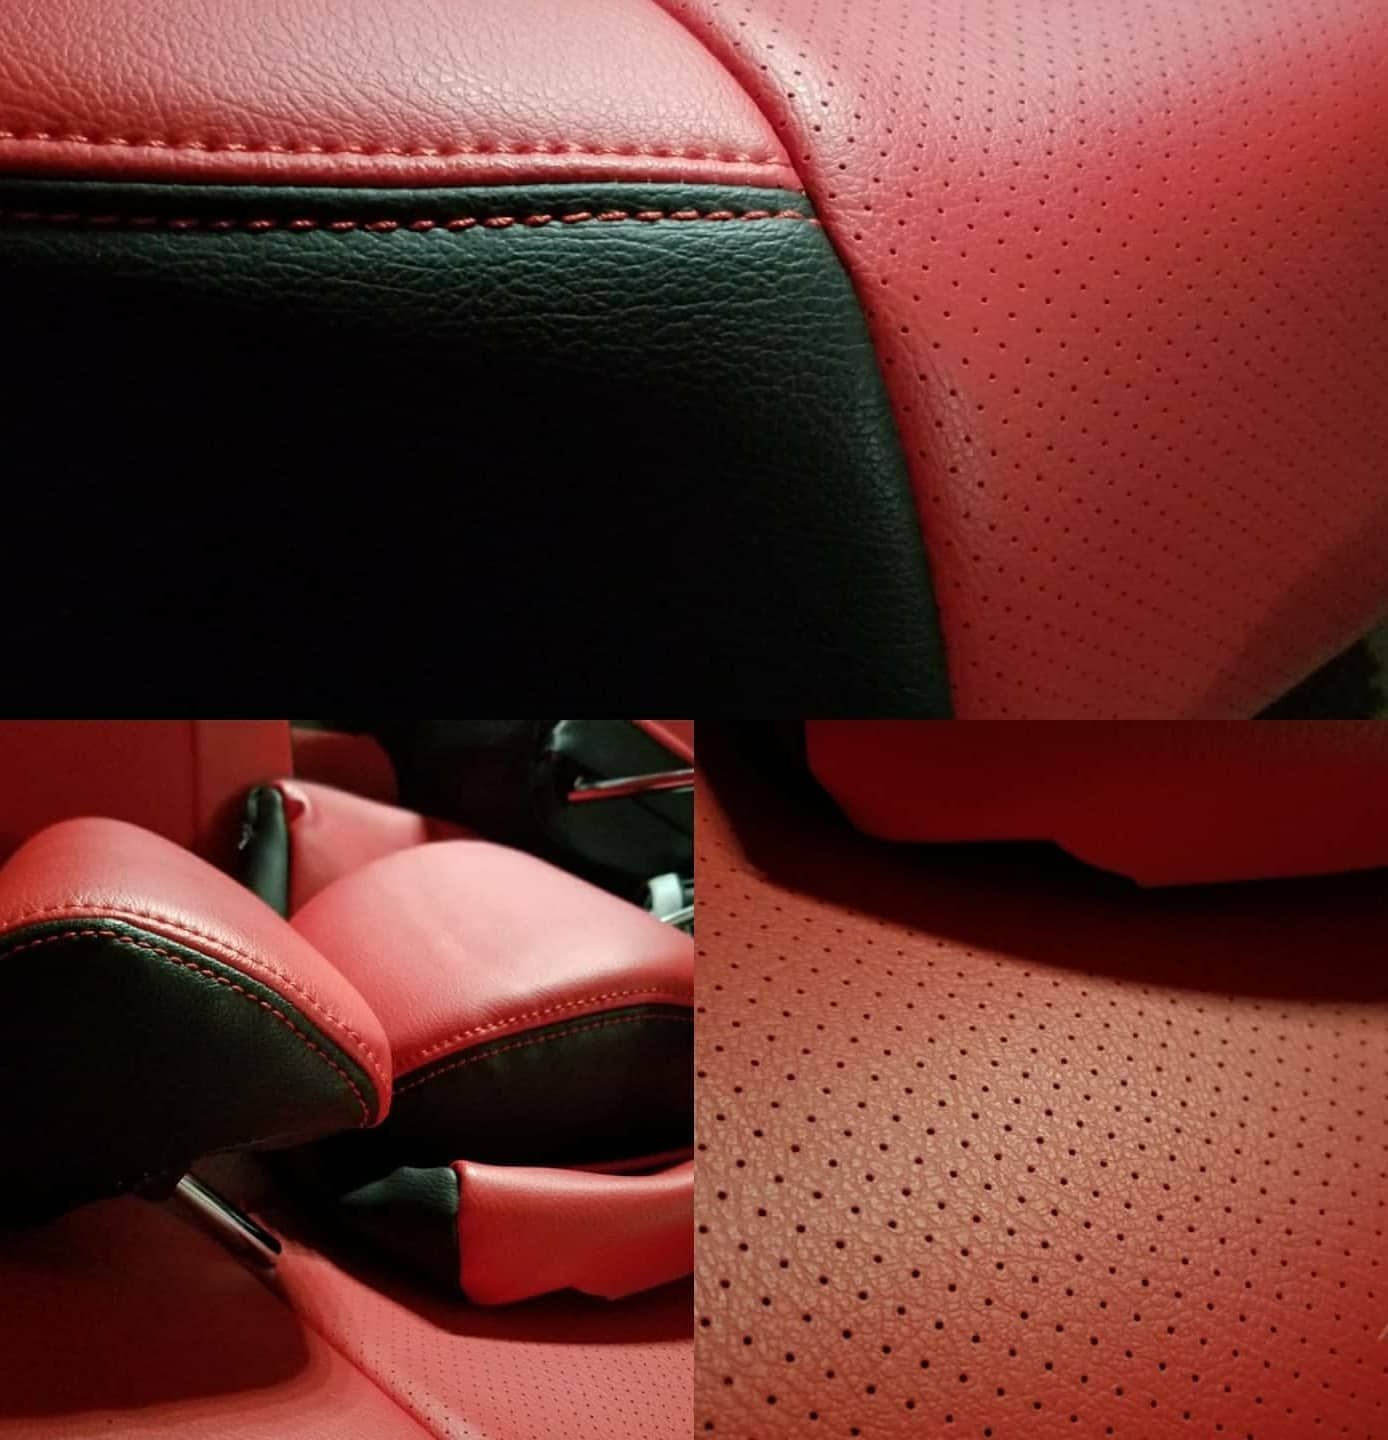 Interior/Upholstery - 2IS IS250 IS350 ISF red and black leather seats - New - 2006 to 2013 Lexus IS250 - Dublin, OH 43017, United States